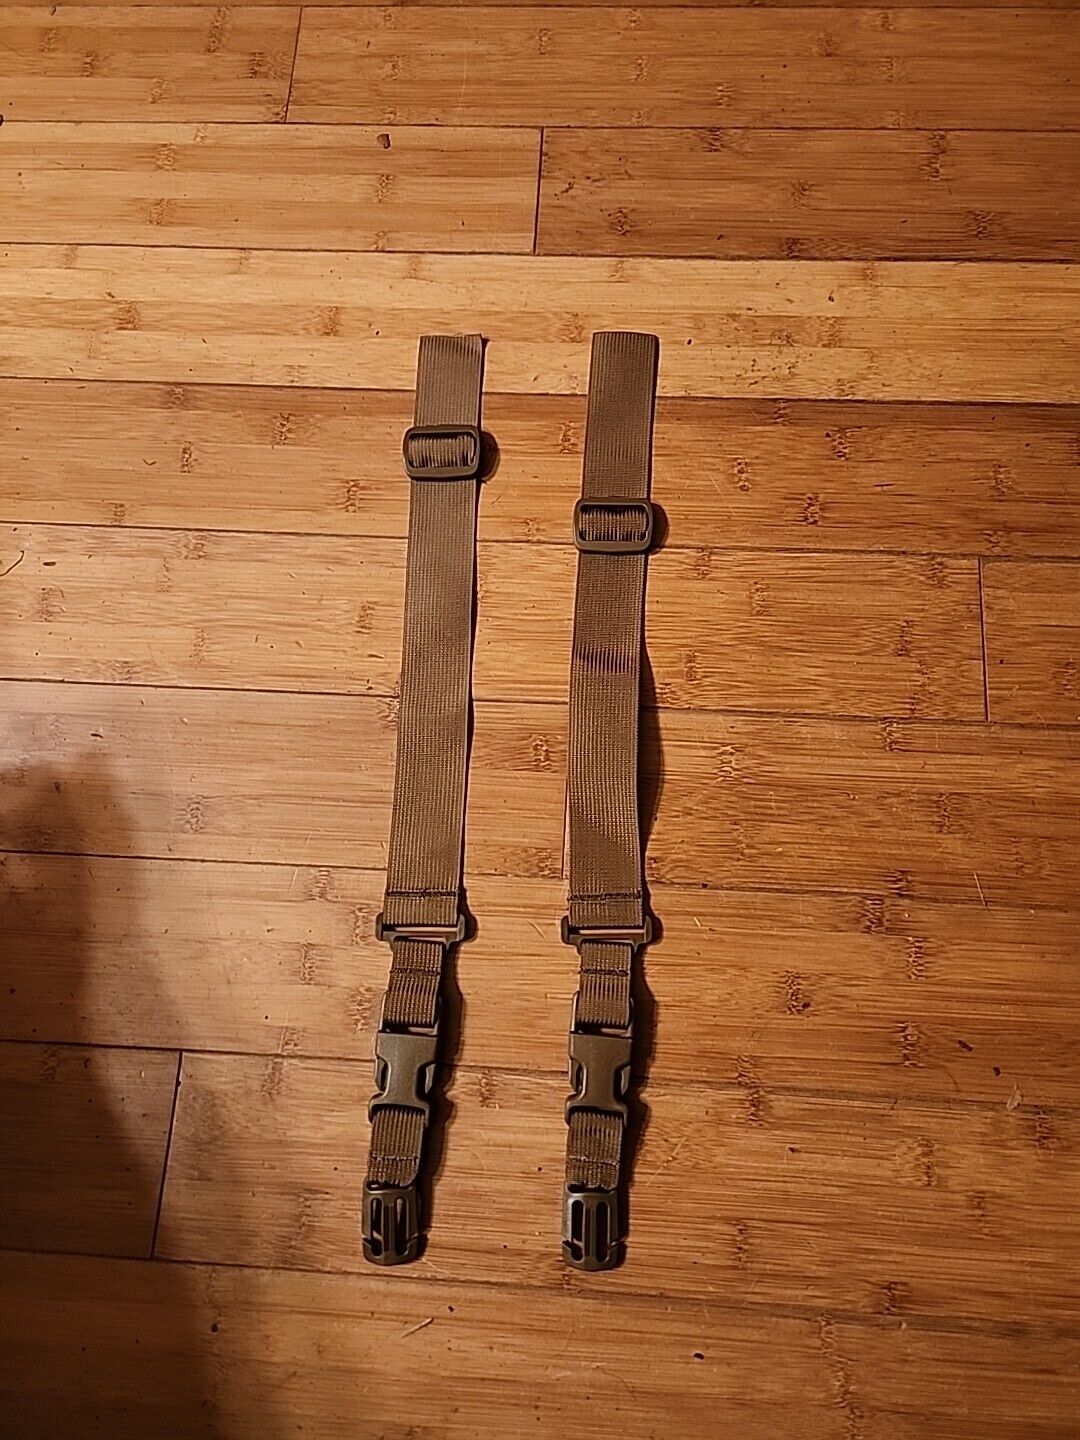 TSSI Tacops m9 Medic Bag Straps, Accessories Coyote Brown New